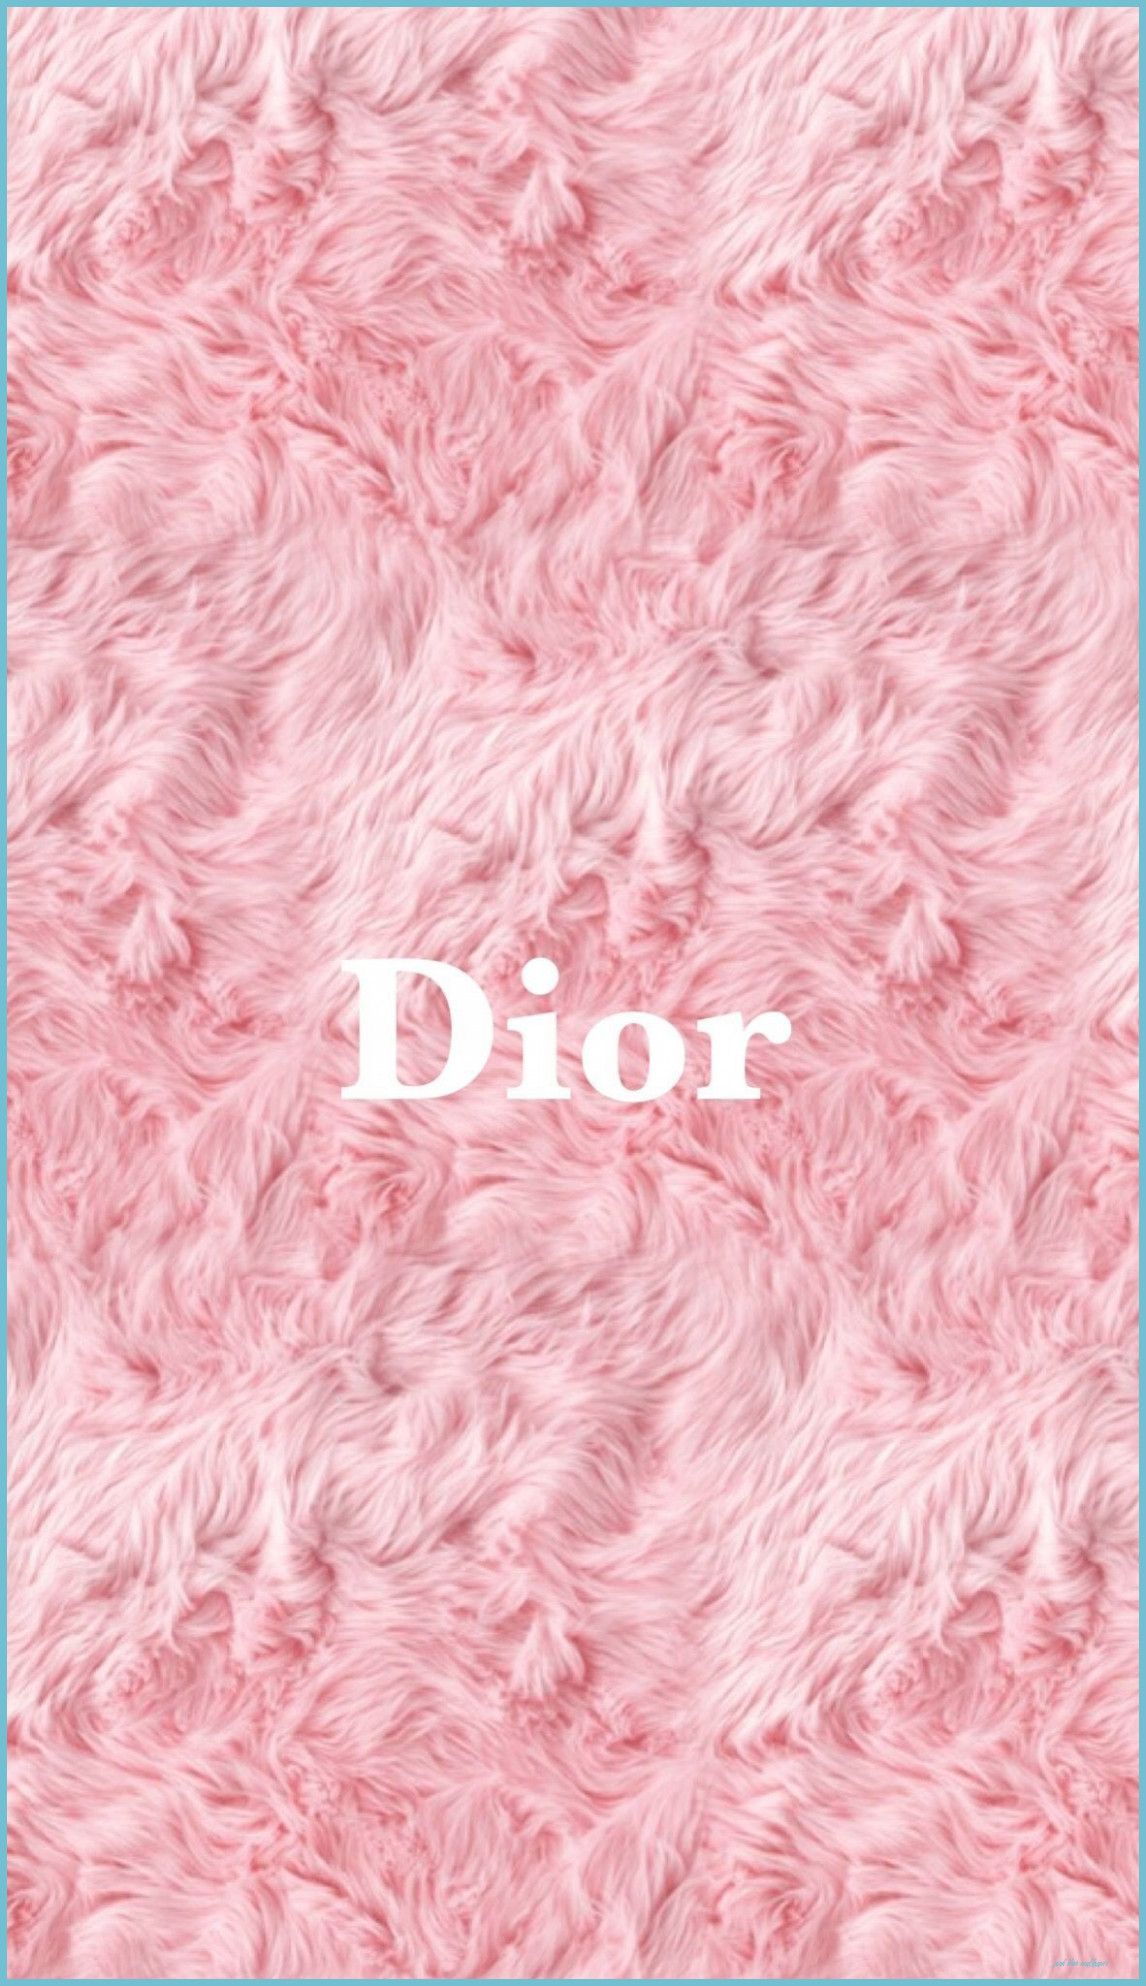 Dior wallpaper for your phone, desktop and laptop! - Dior